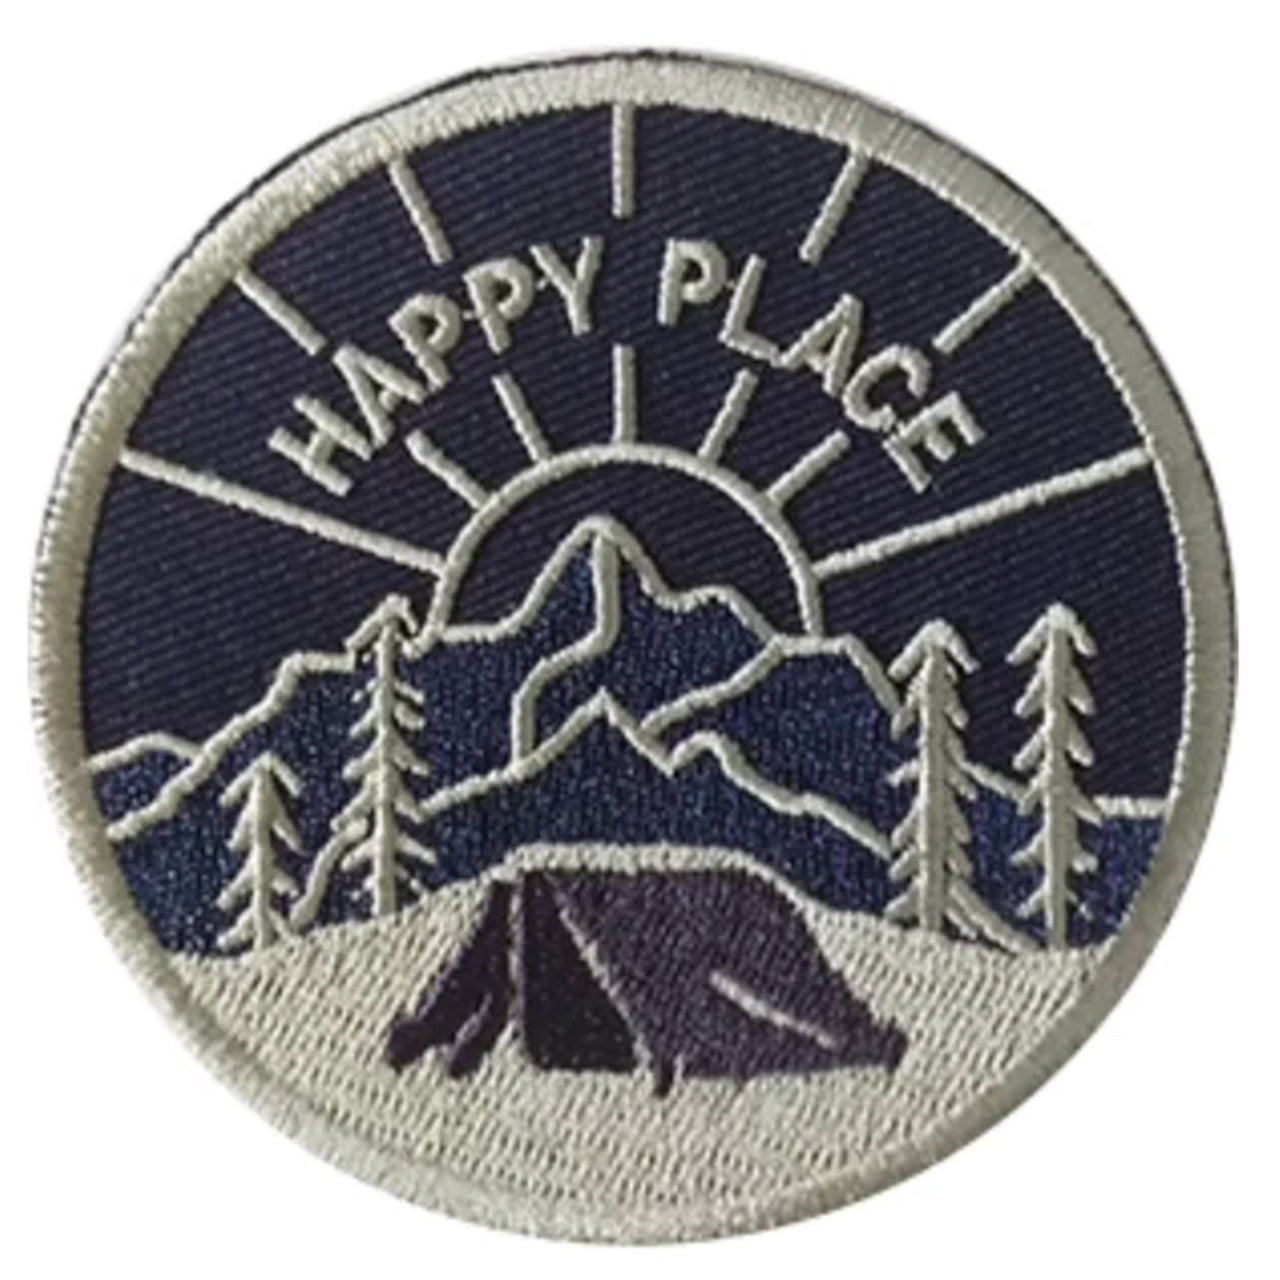 All You Need Is Love Hook Patch and Happy Place 3" Round Hook Patch